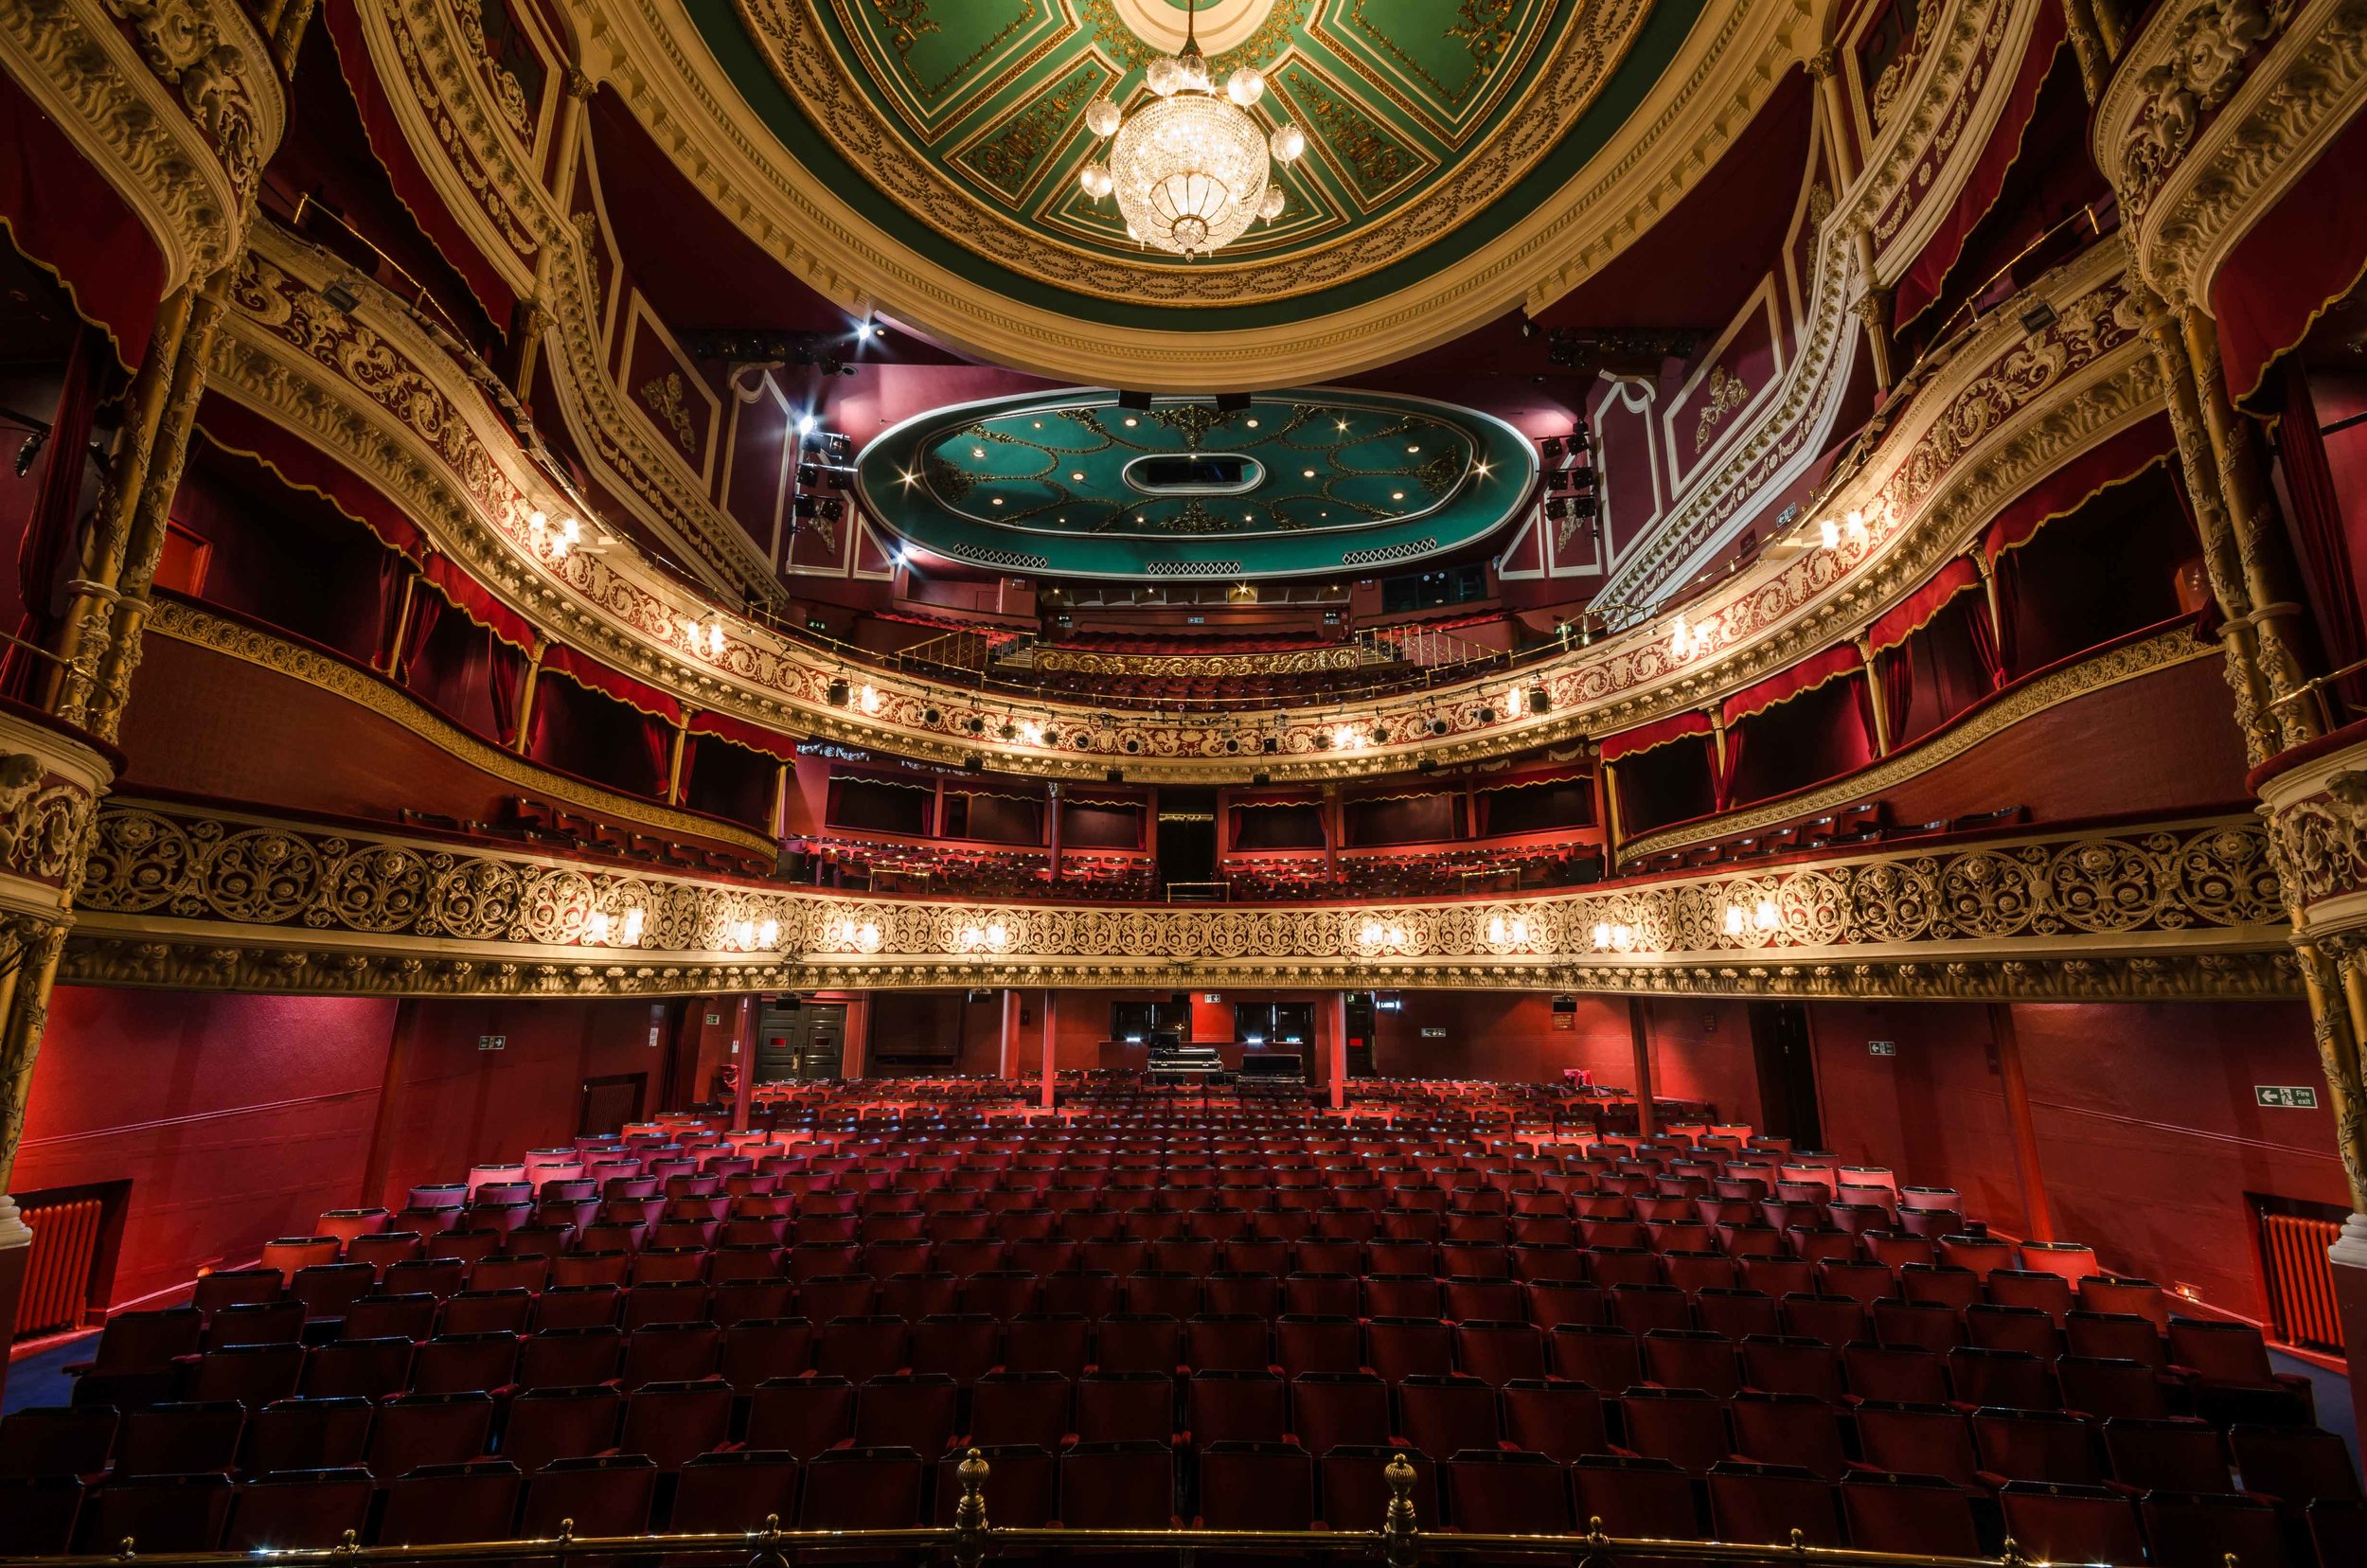 THE GAIETY THEATRE